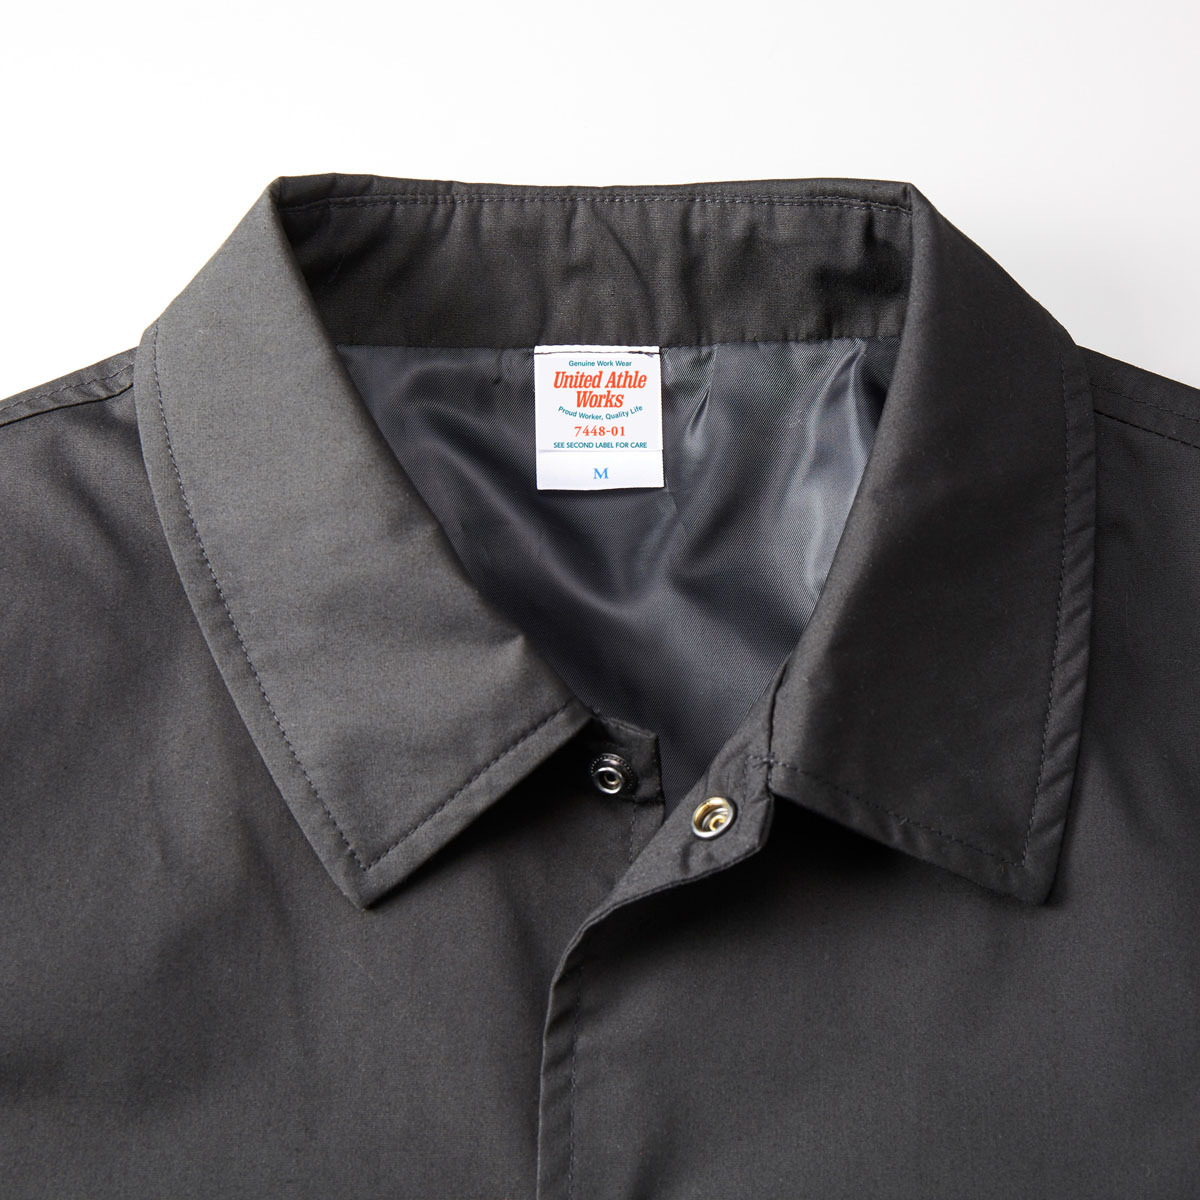 United Athle Works united a attrition Works T/C coach jacket ( lining attaching ) 7448-01 XS~XL